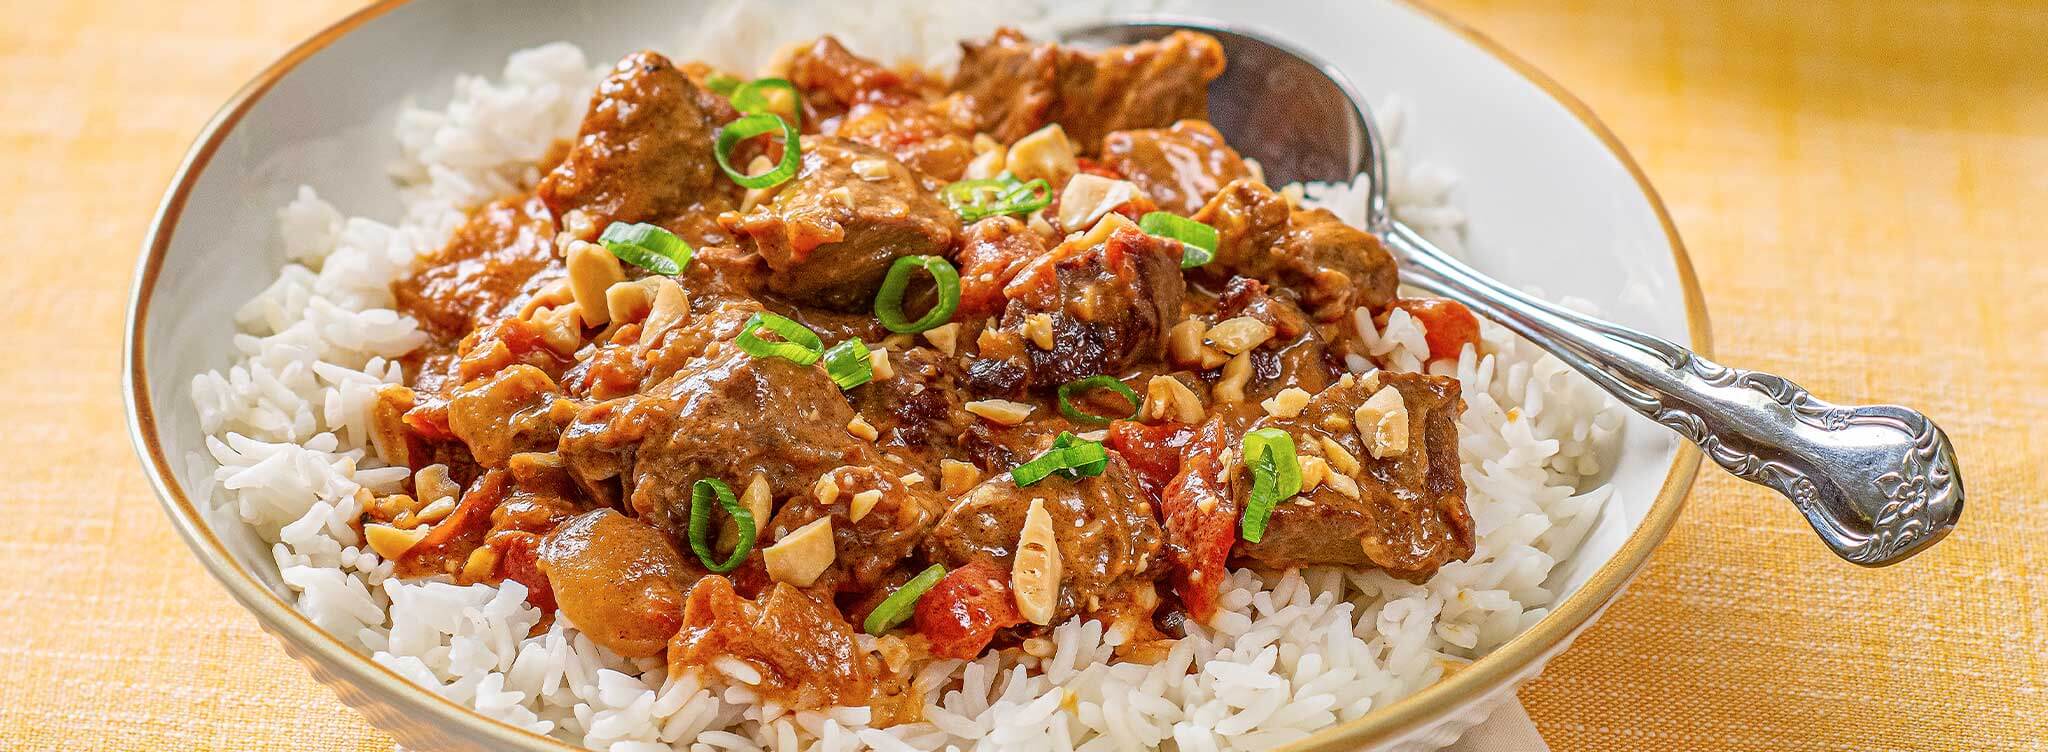 African beef and peanut stew